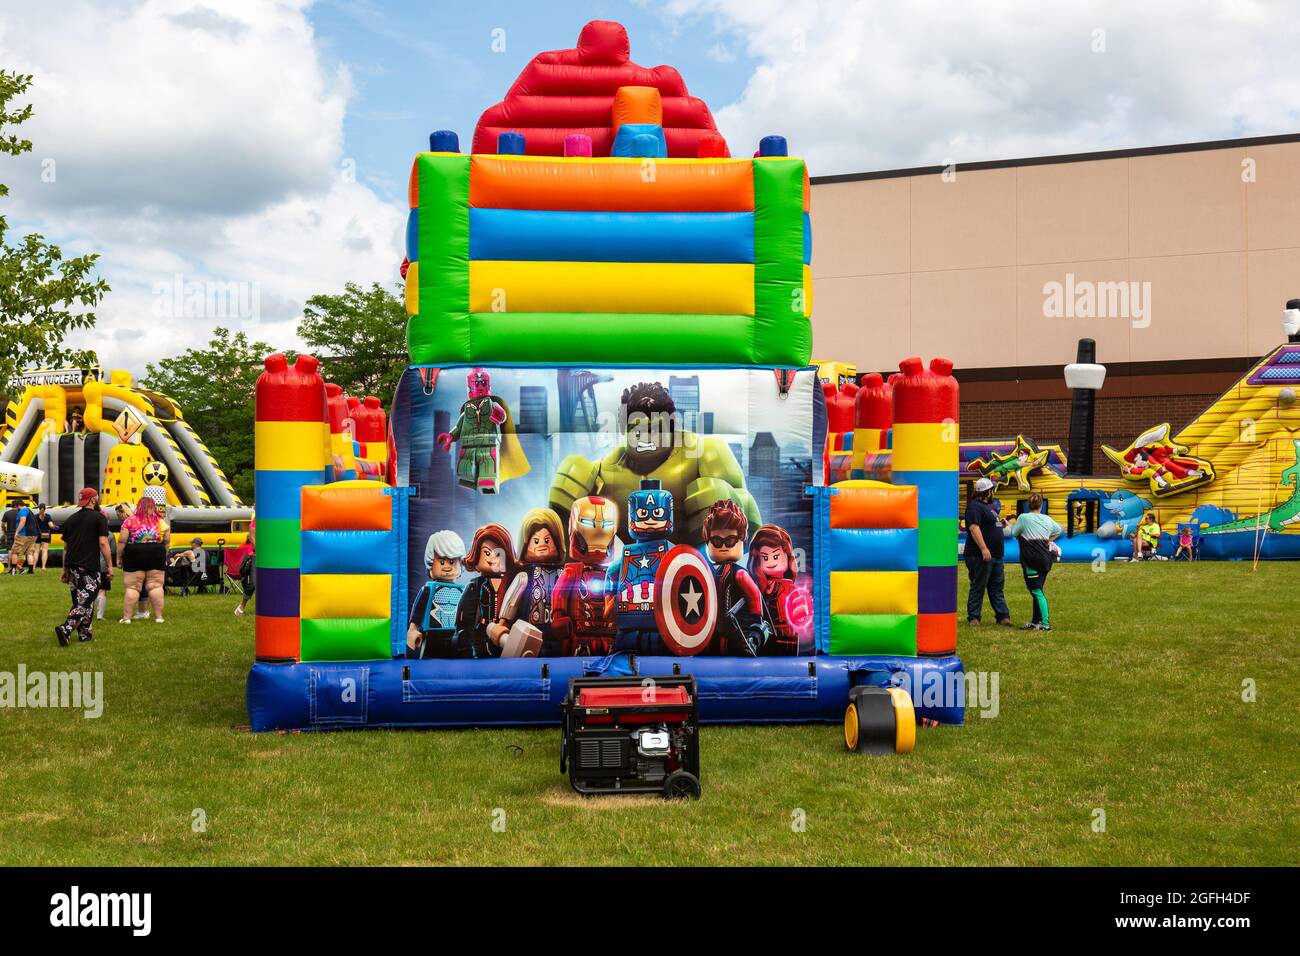 Marvel characters as Legos adorn the side of this inflatable bouncy house outside the Angola High School building in Angola, Indiana, USA. Stock Photo